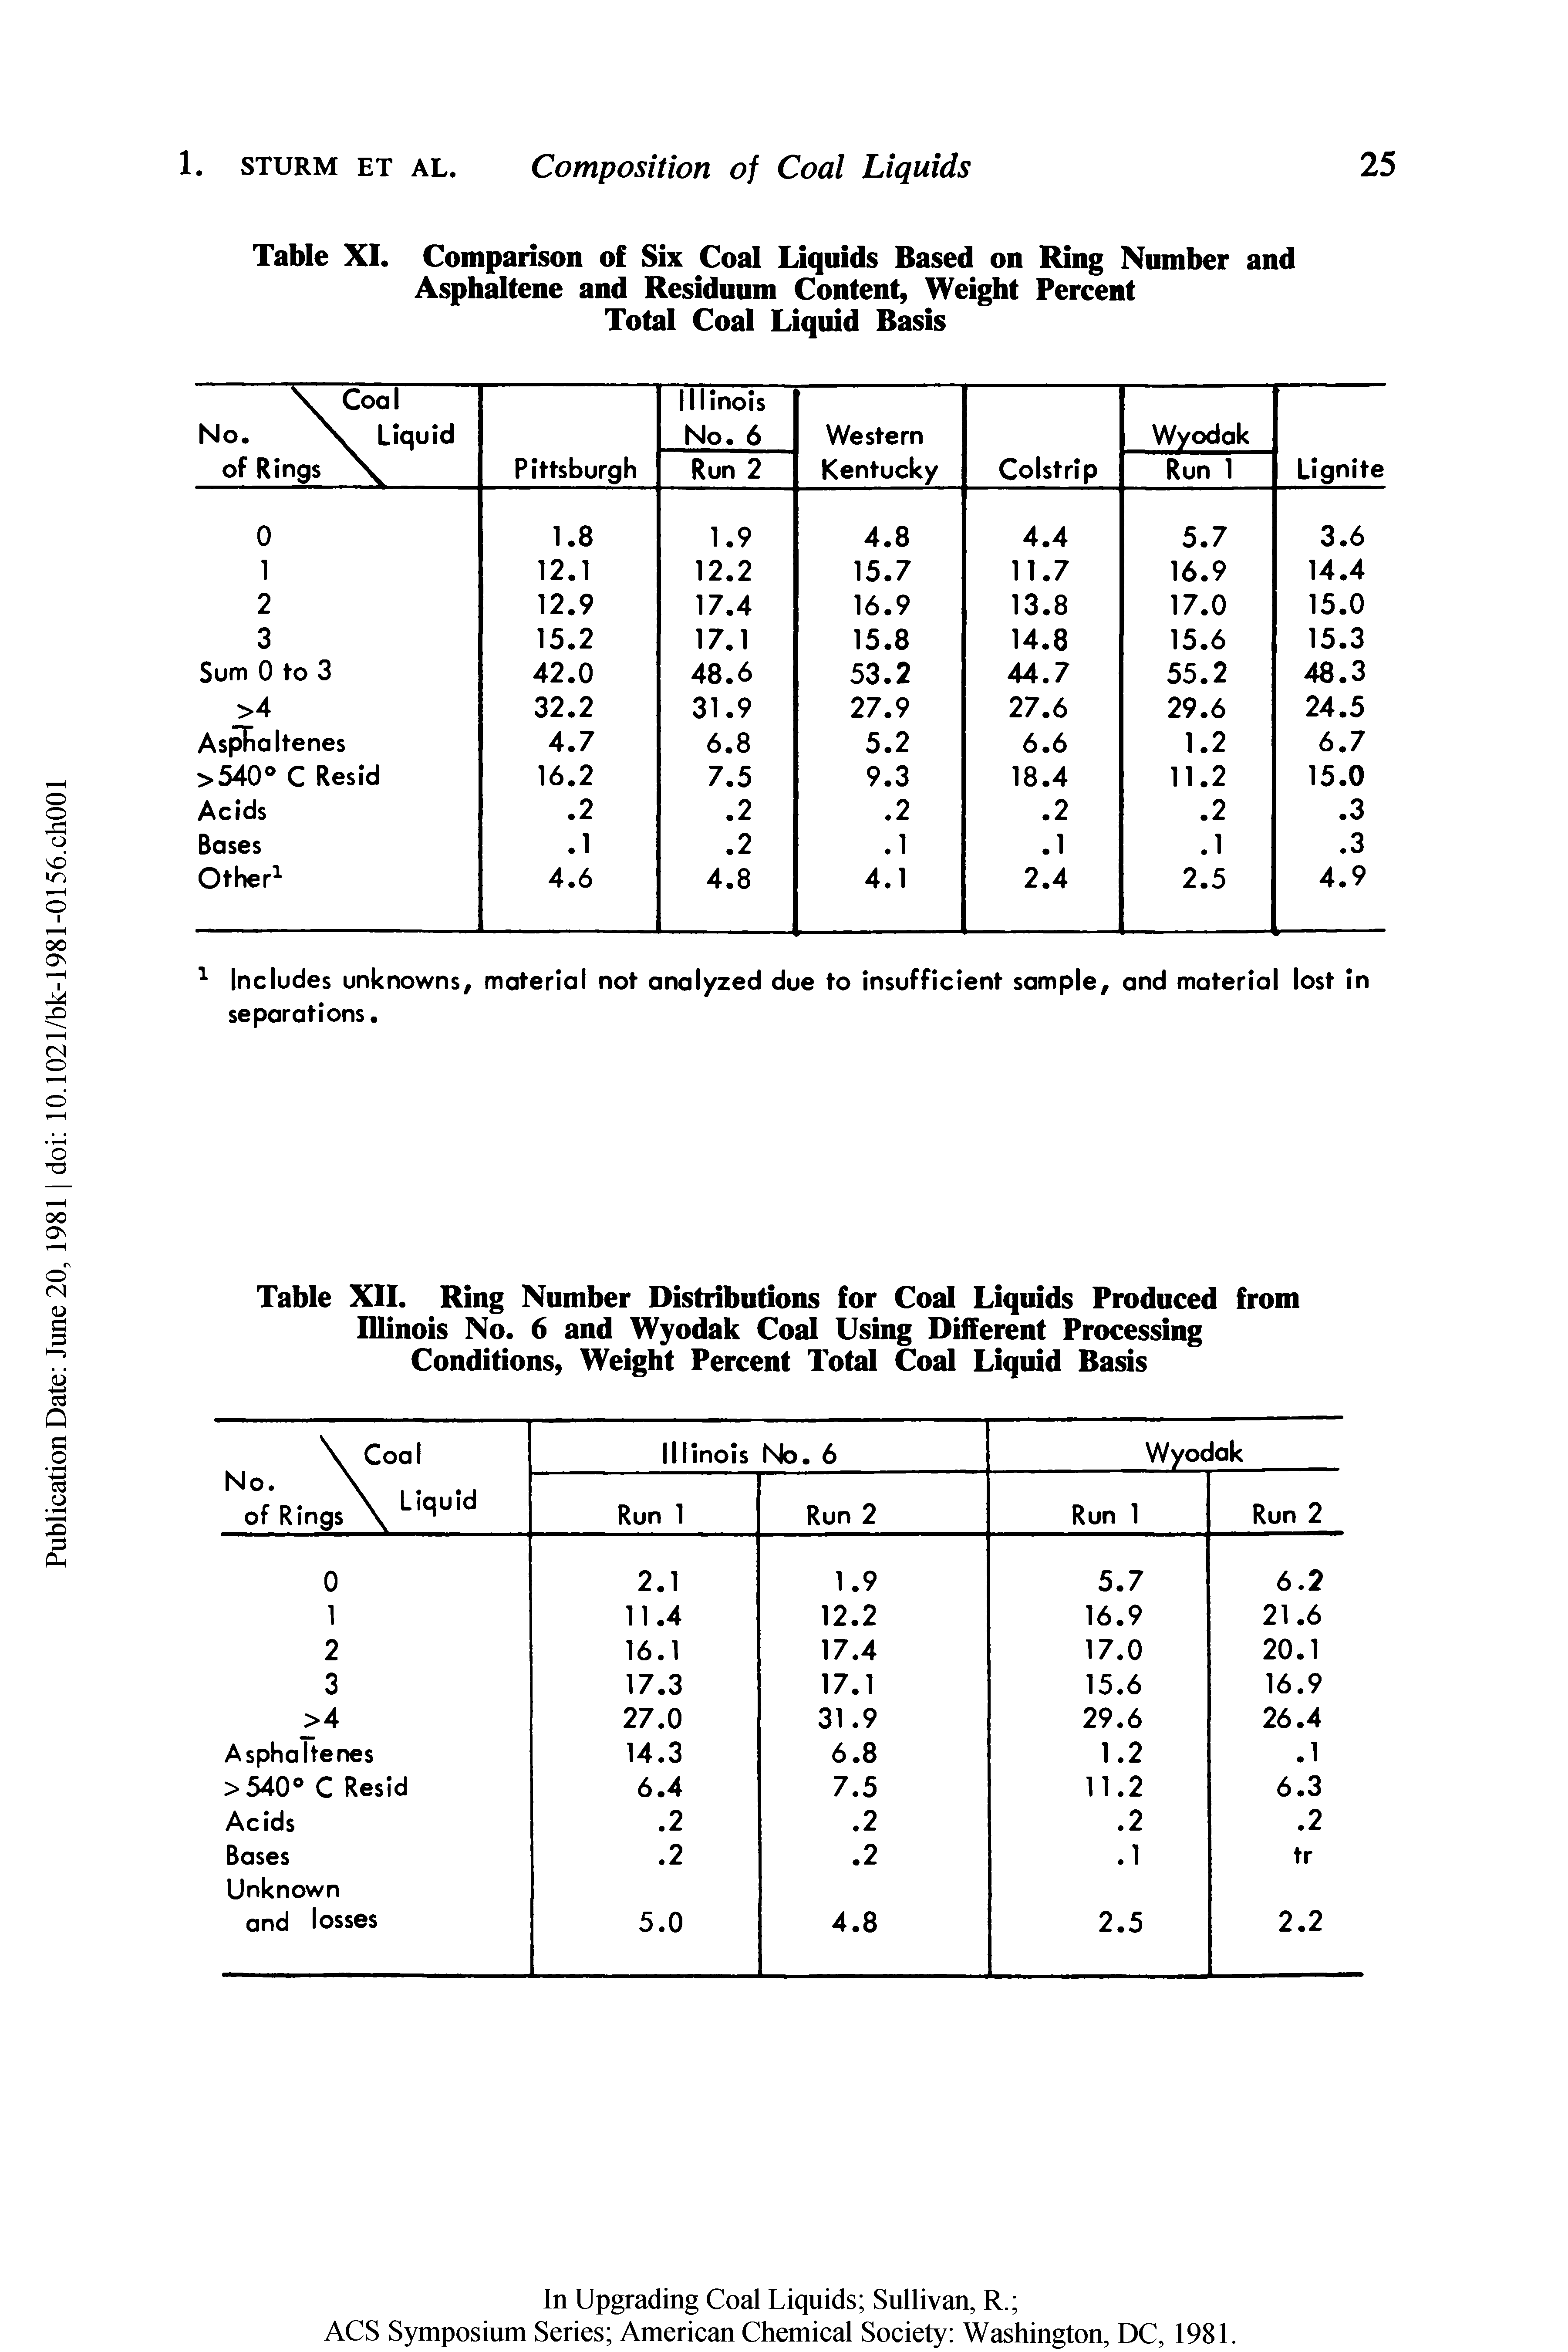 Table XII. Ring Number Distributions for Coal Liquids Produced from Illinois No. 6 and Wyodak Coal Using Different Processing Conditions, Weight Percent Total Coal Liquid Basis...